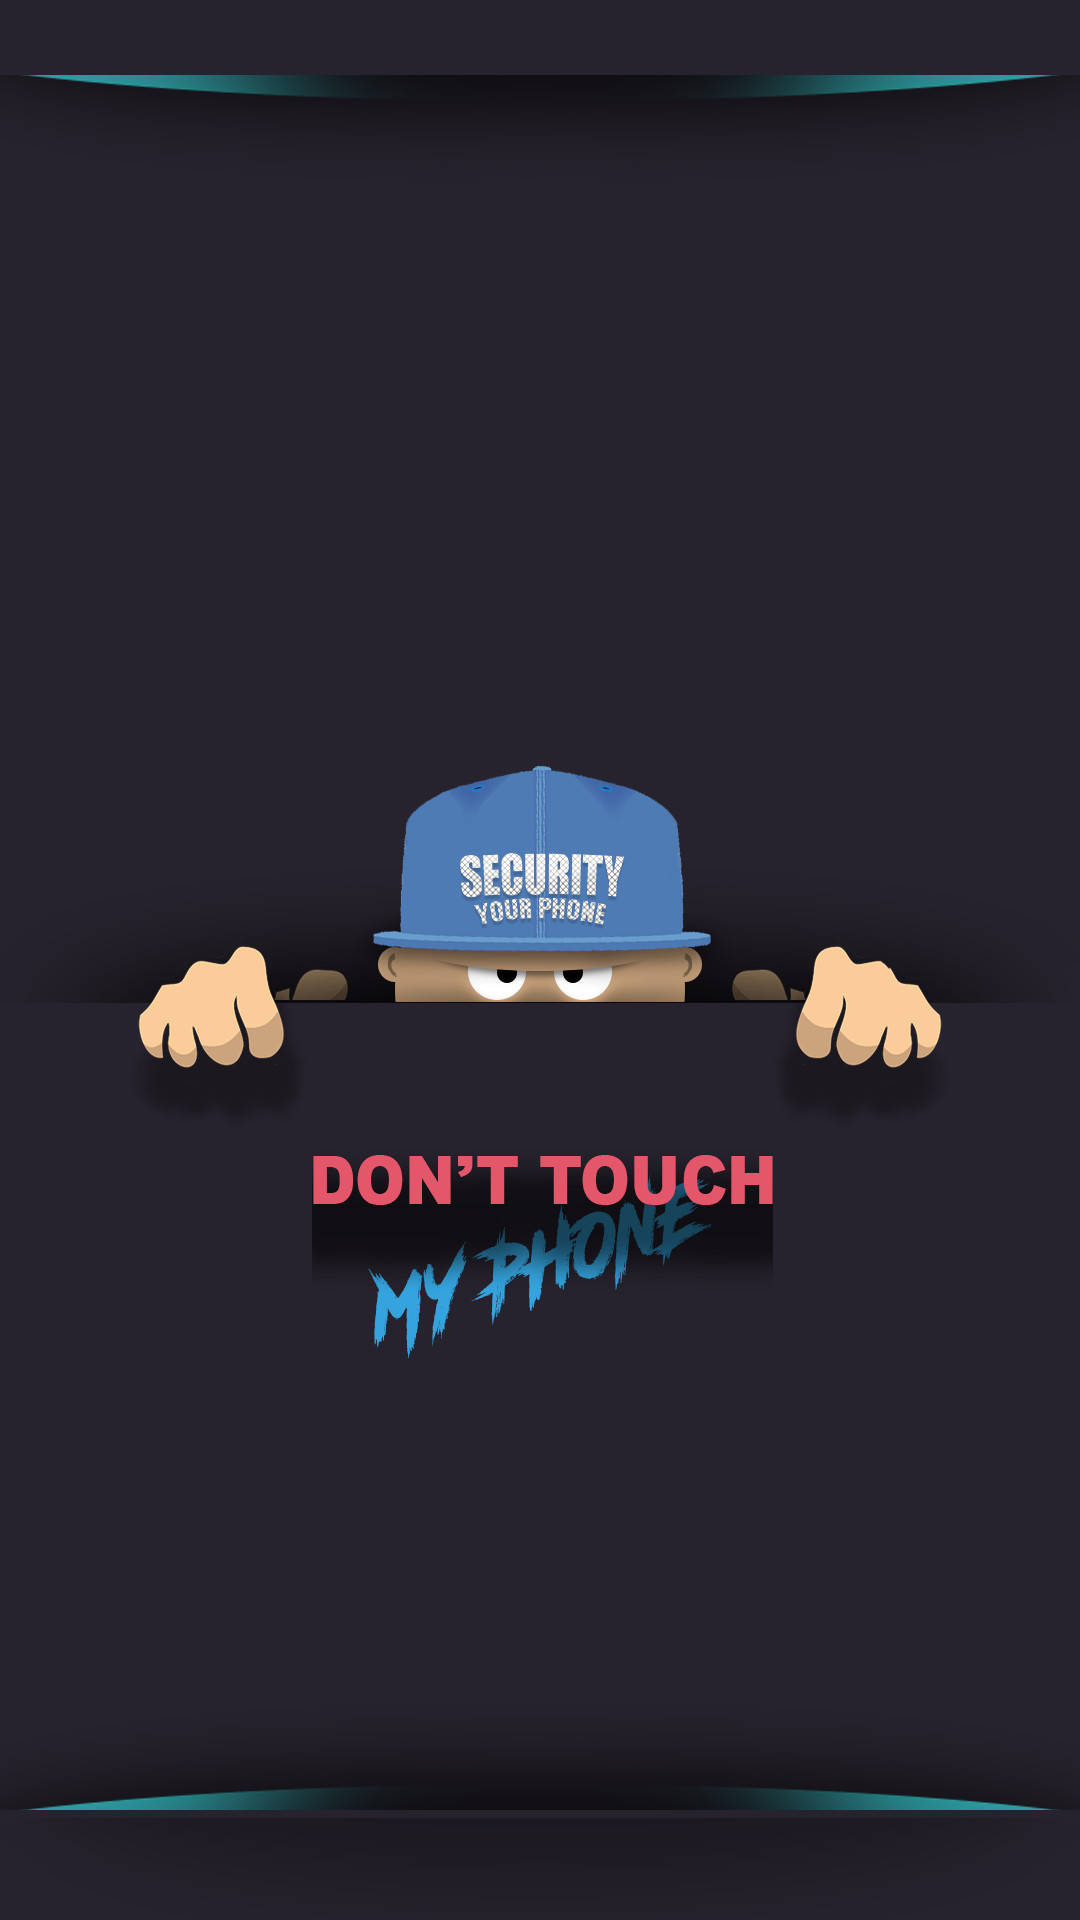 Don't Touch My Phone Security Cap Wallpaper